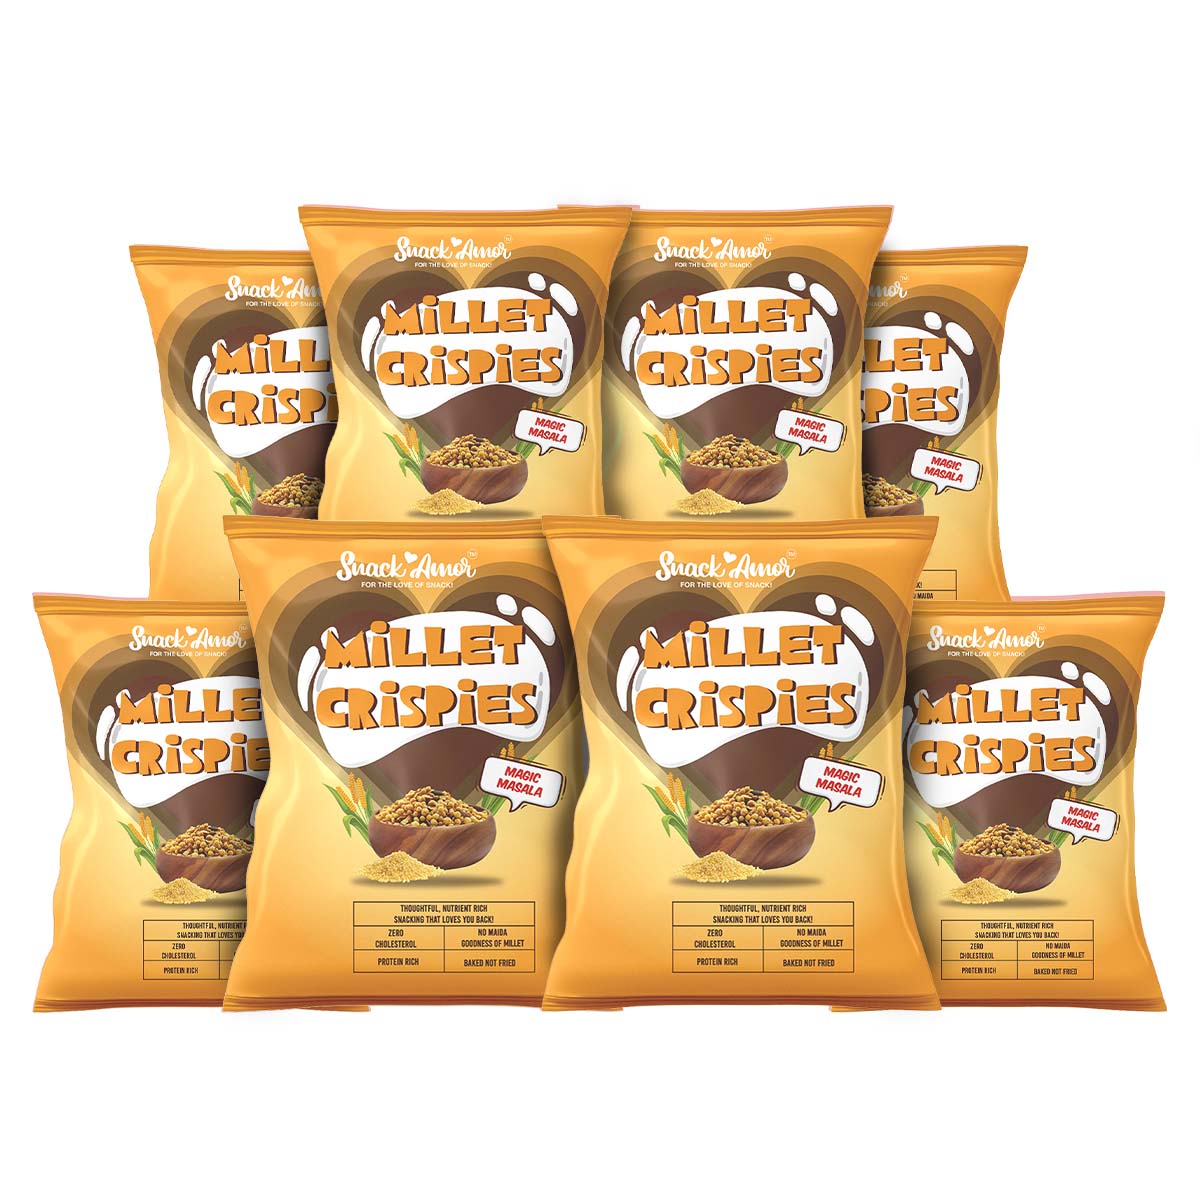 Millet Crispies- Zesty, Nutritious Magic Masala Value Pack of 8 (27g each) - Snack Amor